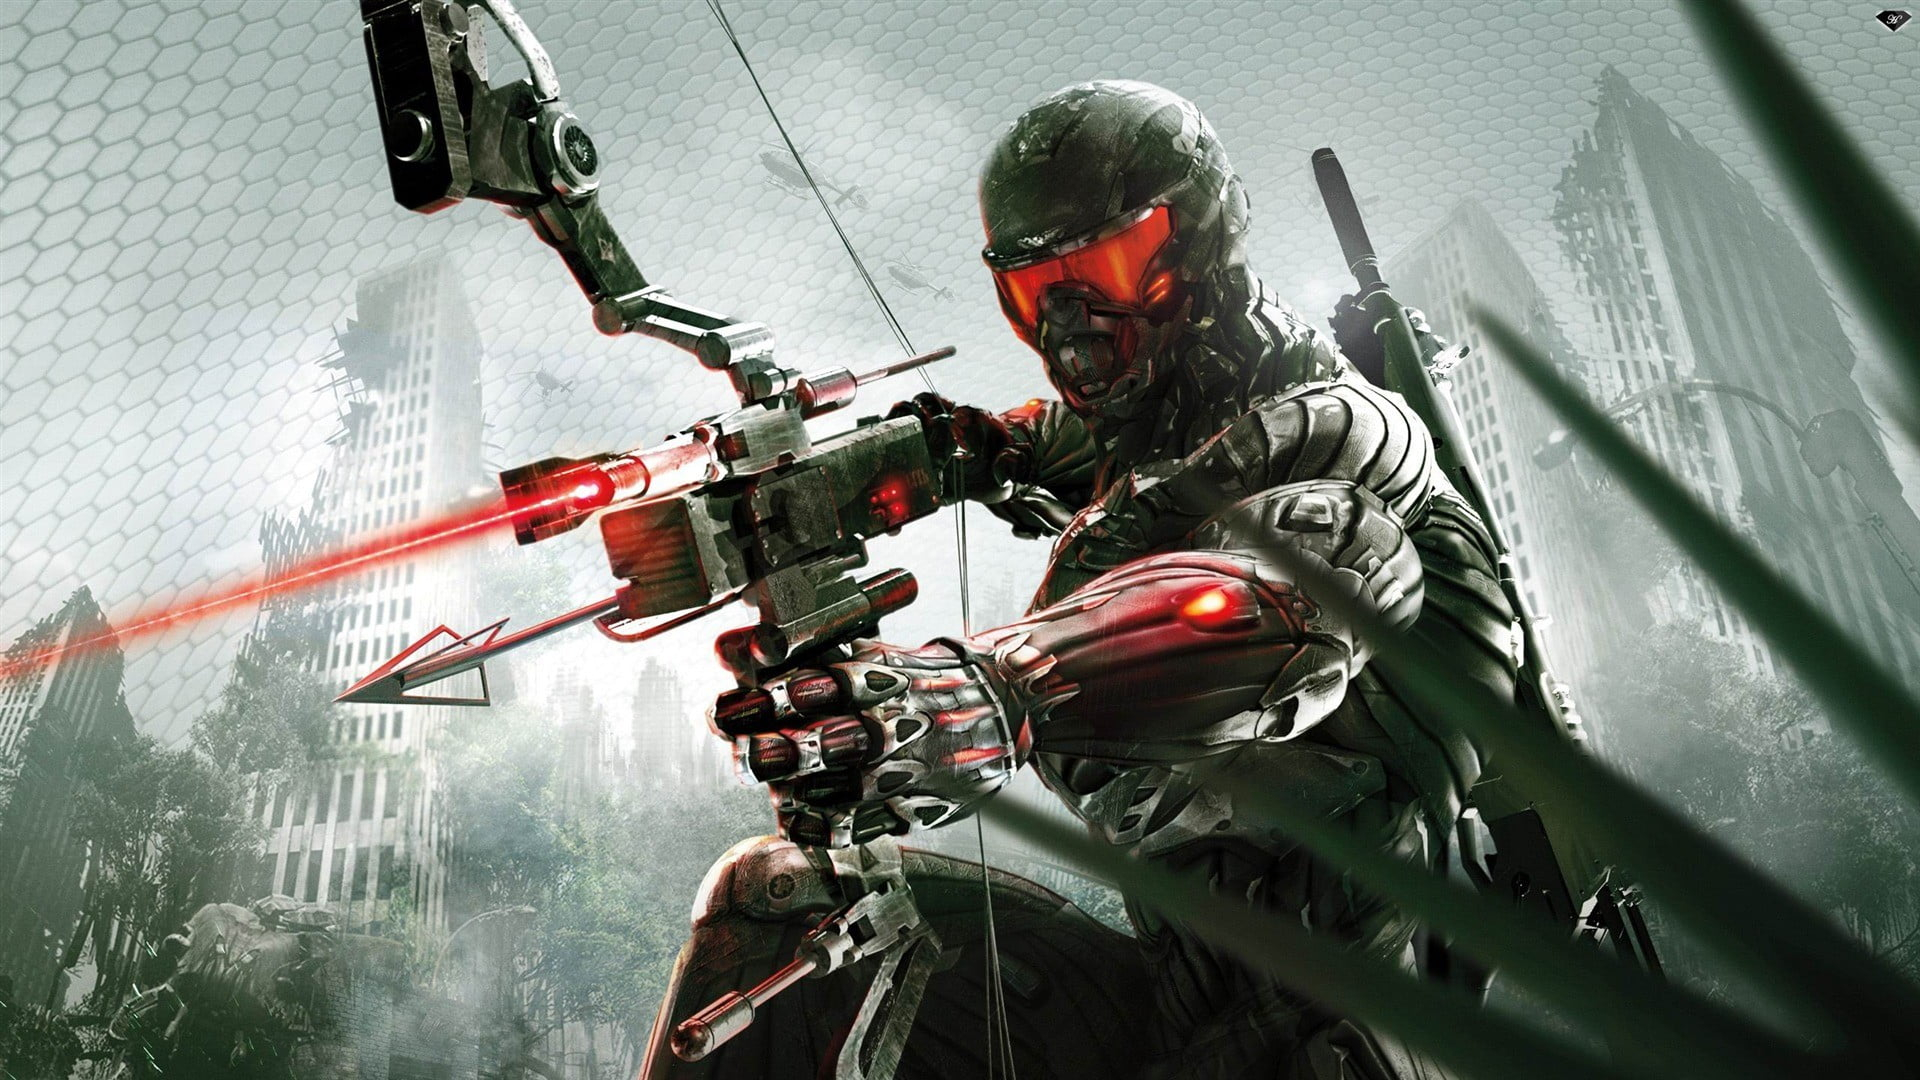 1920x1080 Special ops archer wallpaper, Crysis 3, video games HD wallpaper | Wallpaper Flare